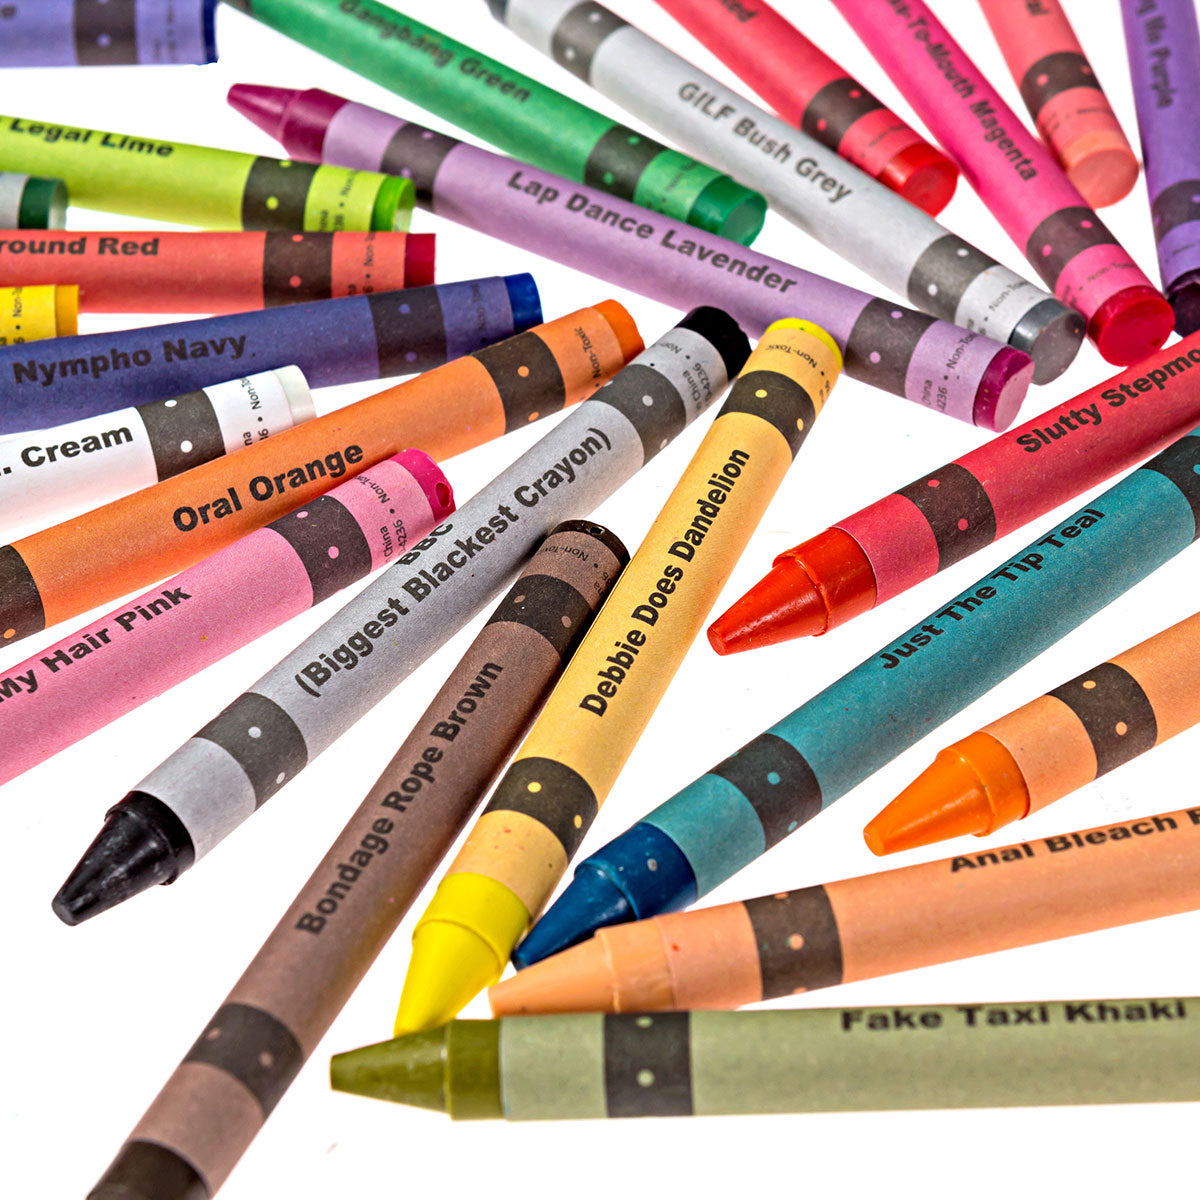 Offensive Crayons: Porn Pack